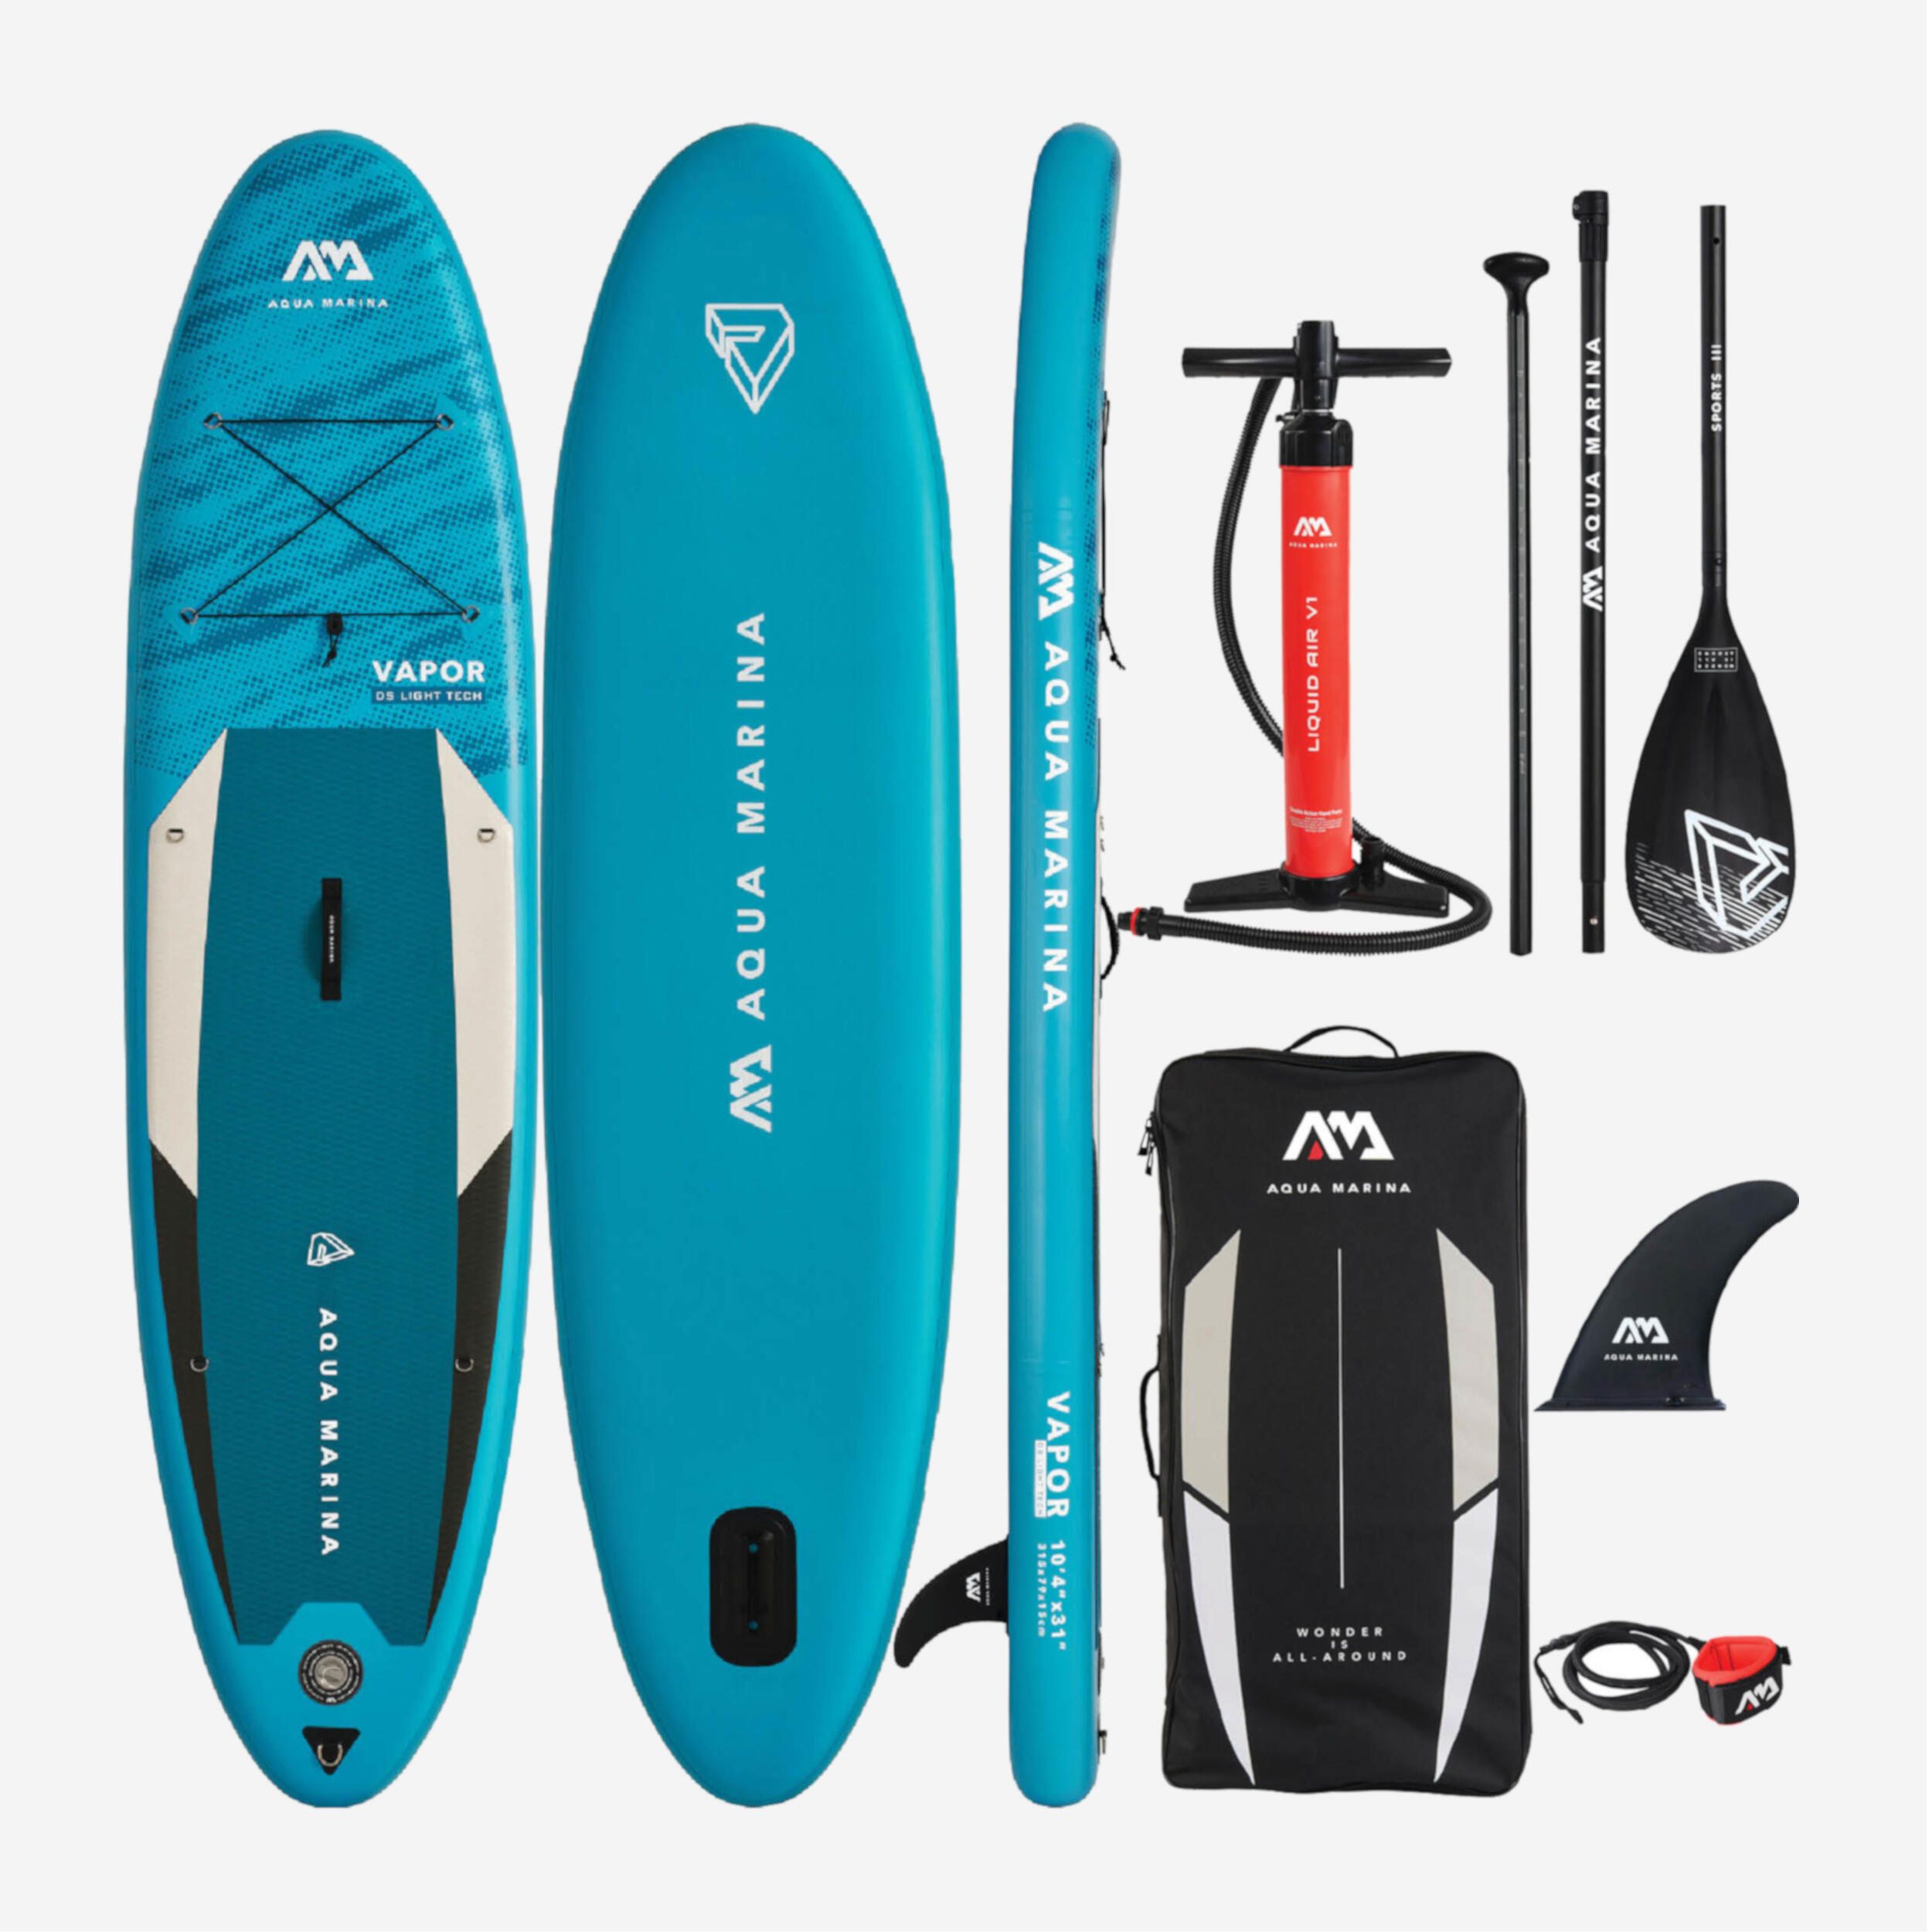 Aqua Marina Vapor stand-up paddle board package 10ft4/315cm 1/16